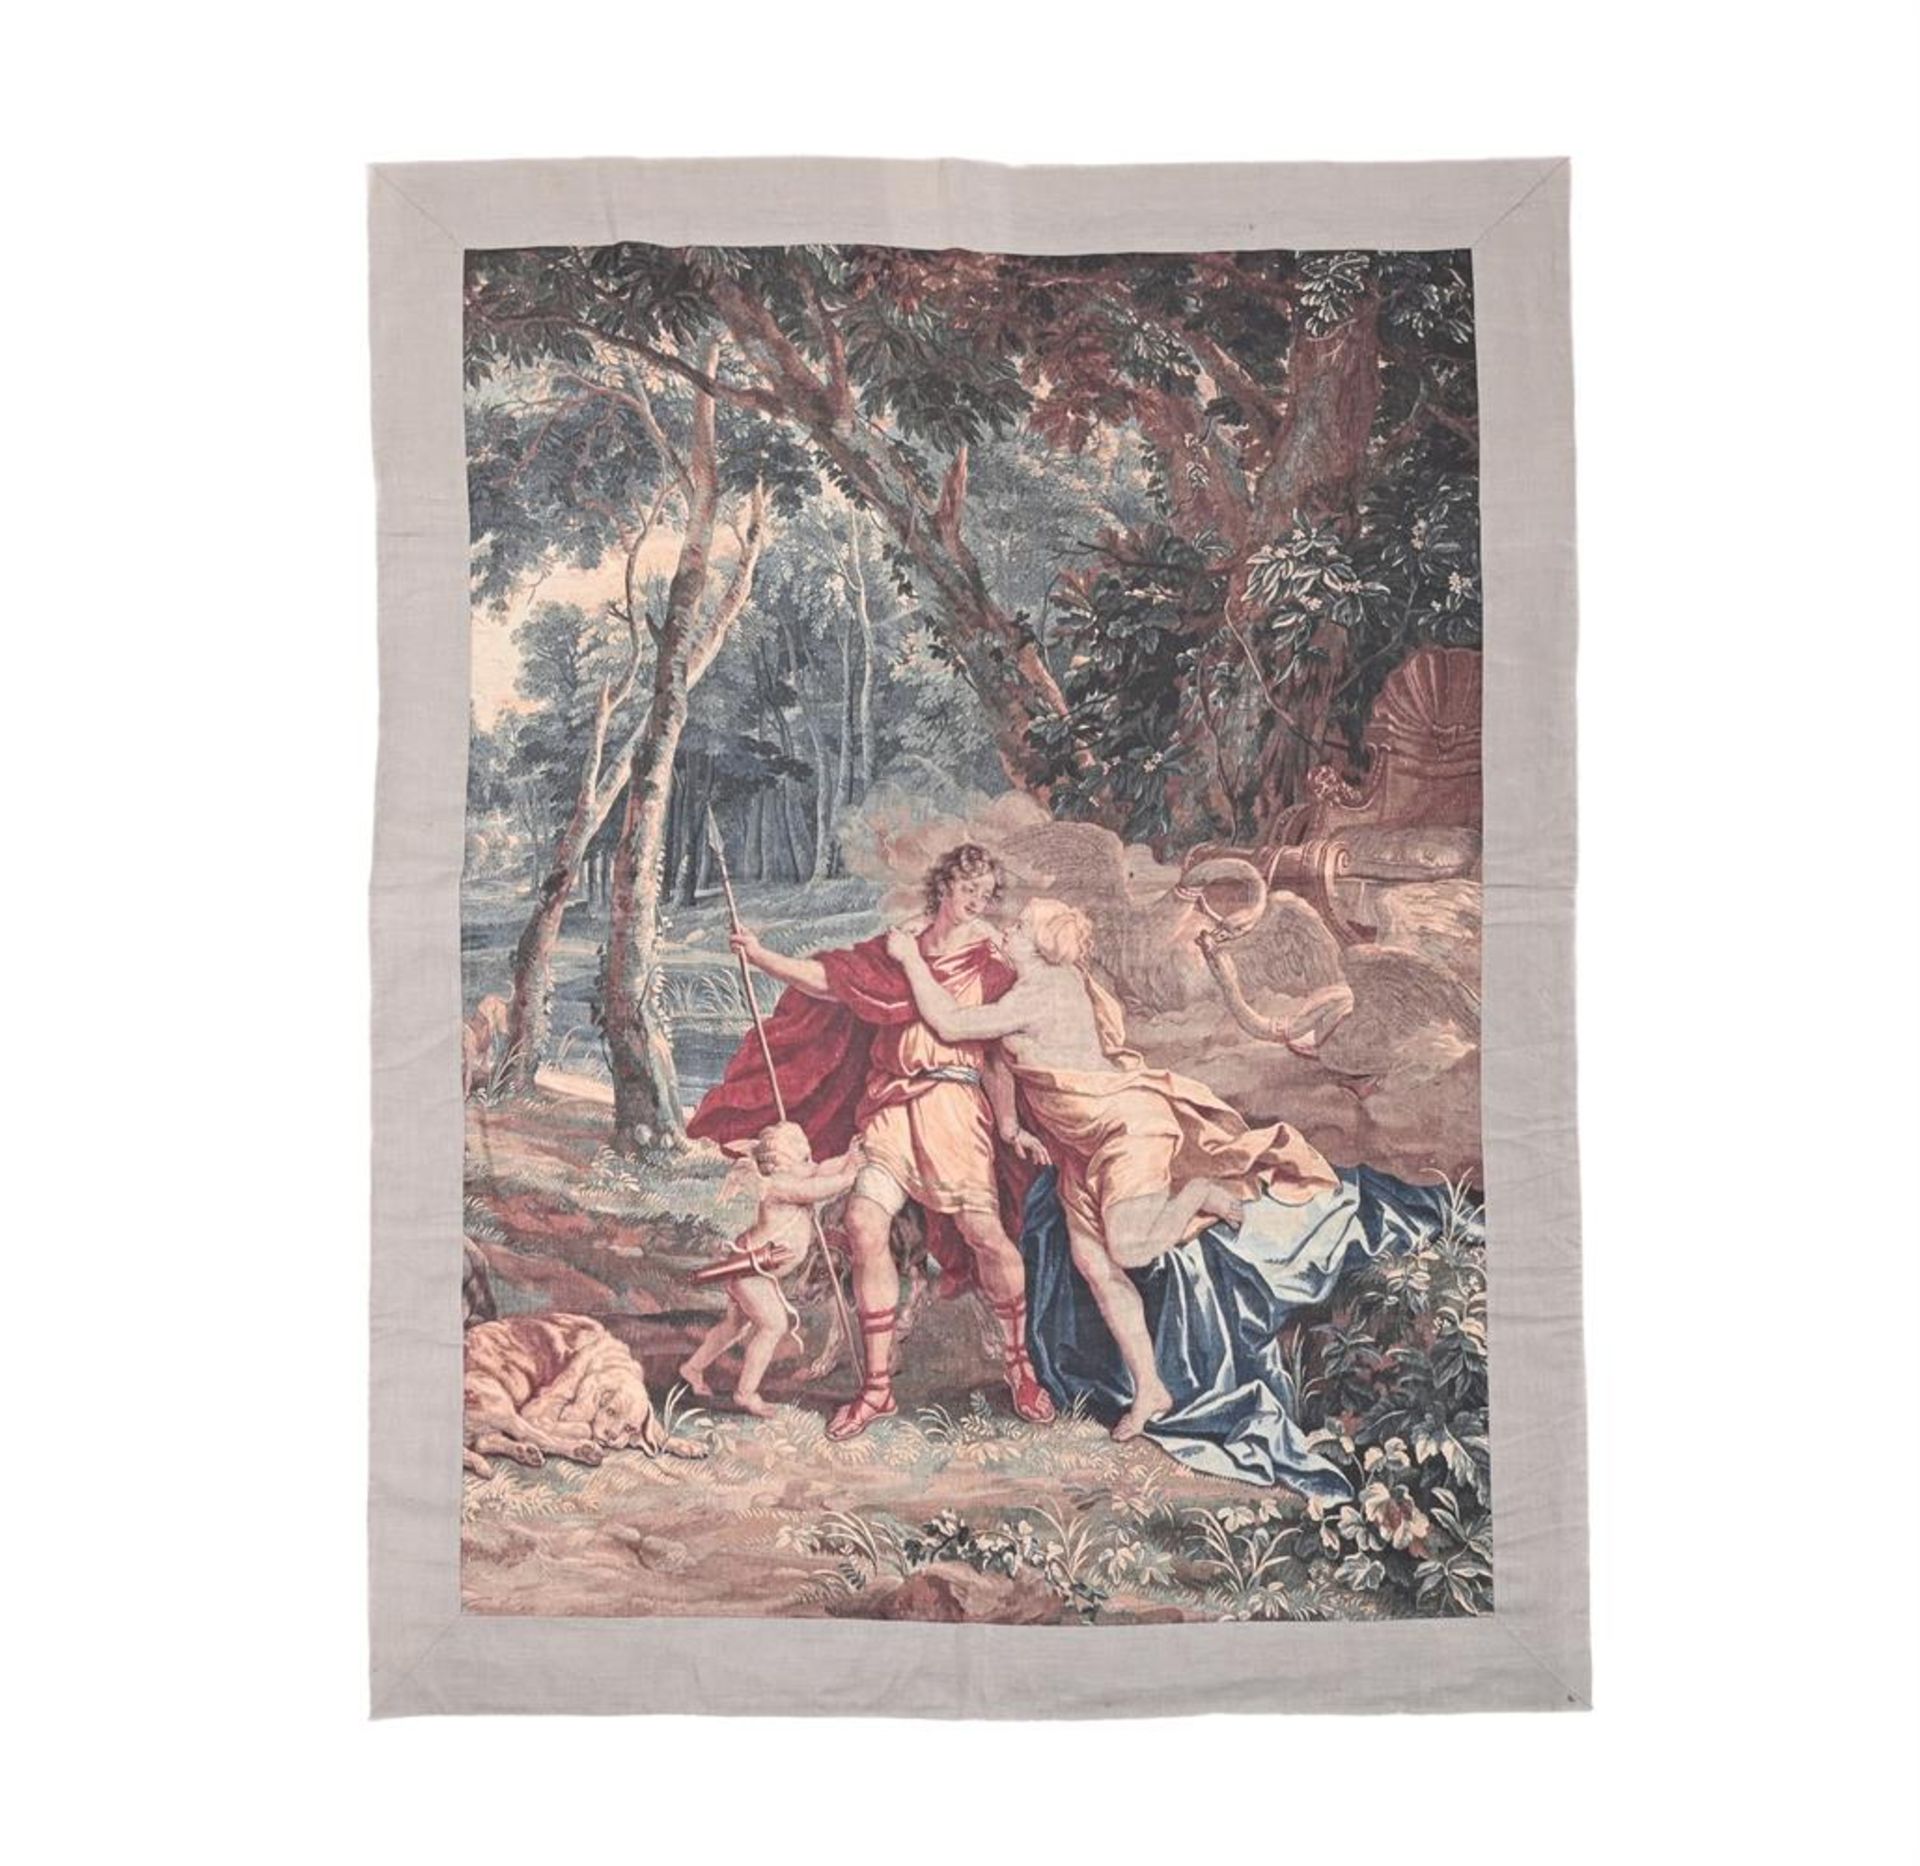 A TAPESTRY STYLE WALL HANGING DEPICTING THE LOVE OF GODS